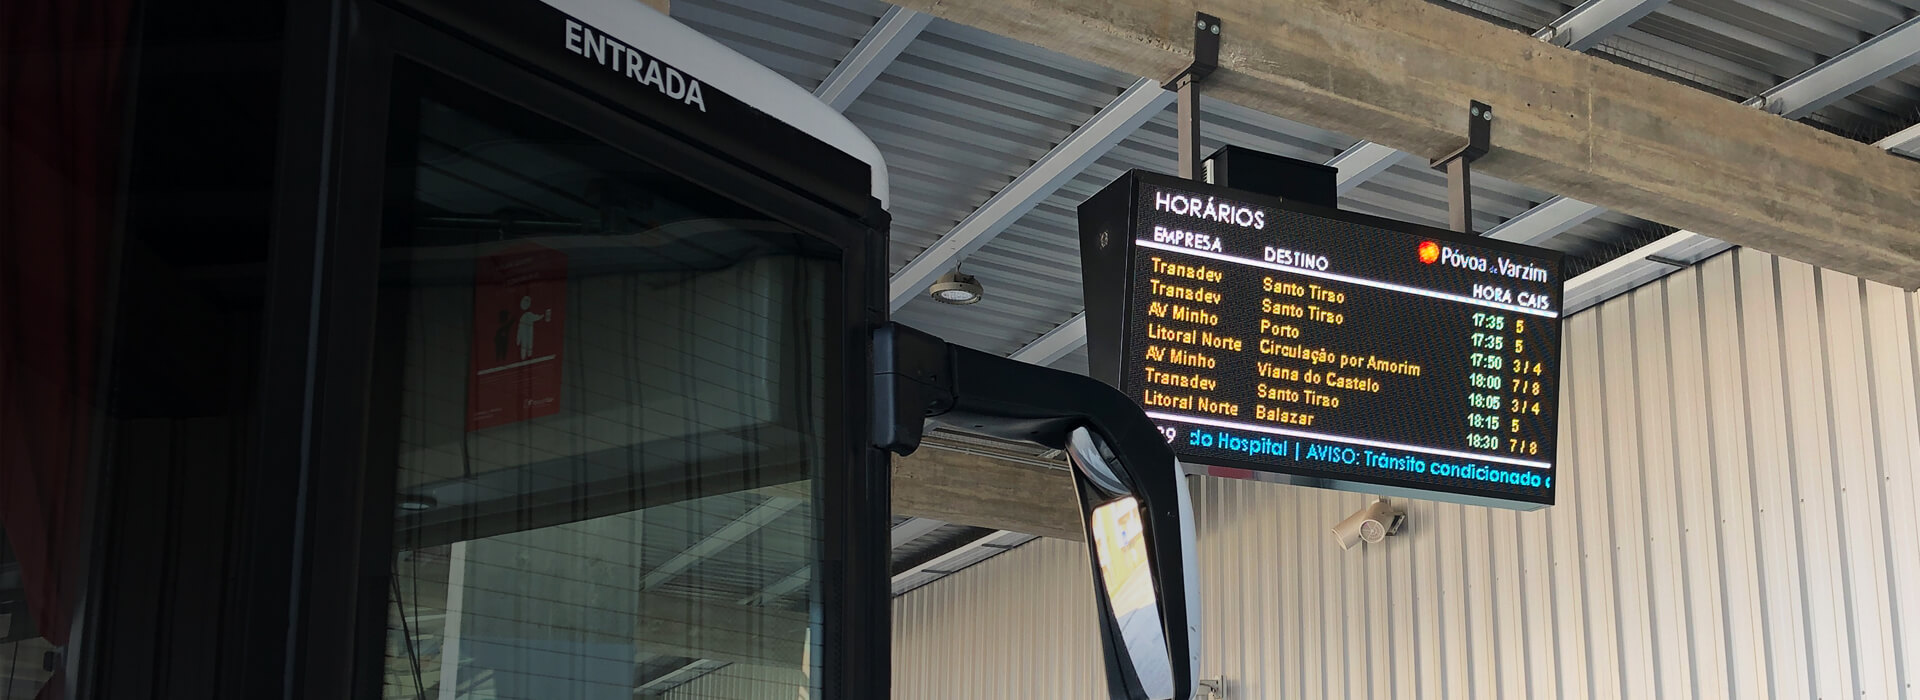 <span class='text-highlight'>LED displays</span> installed in Póvoa de Varzim's bus station